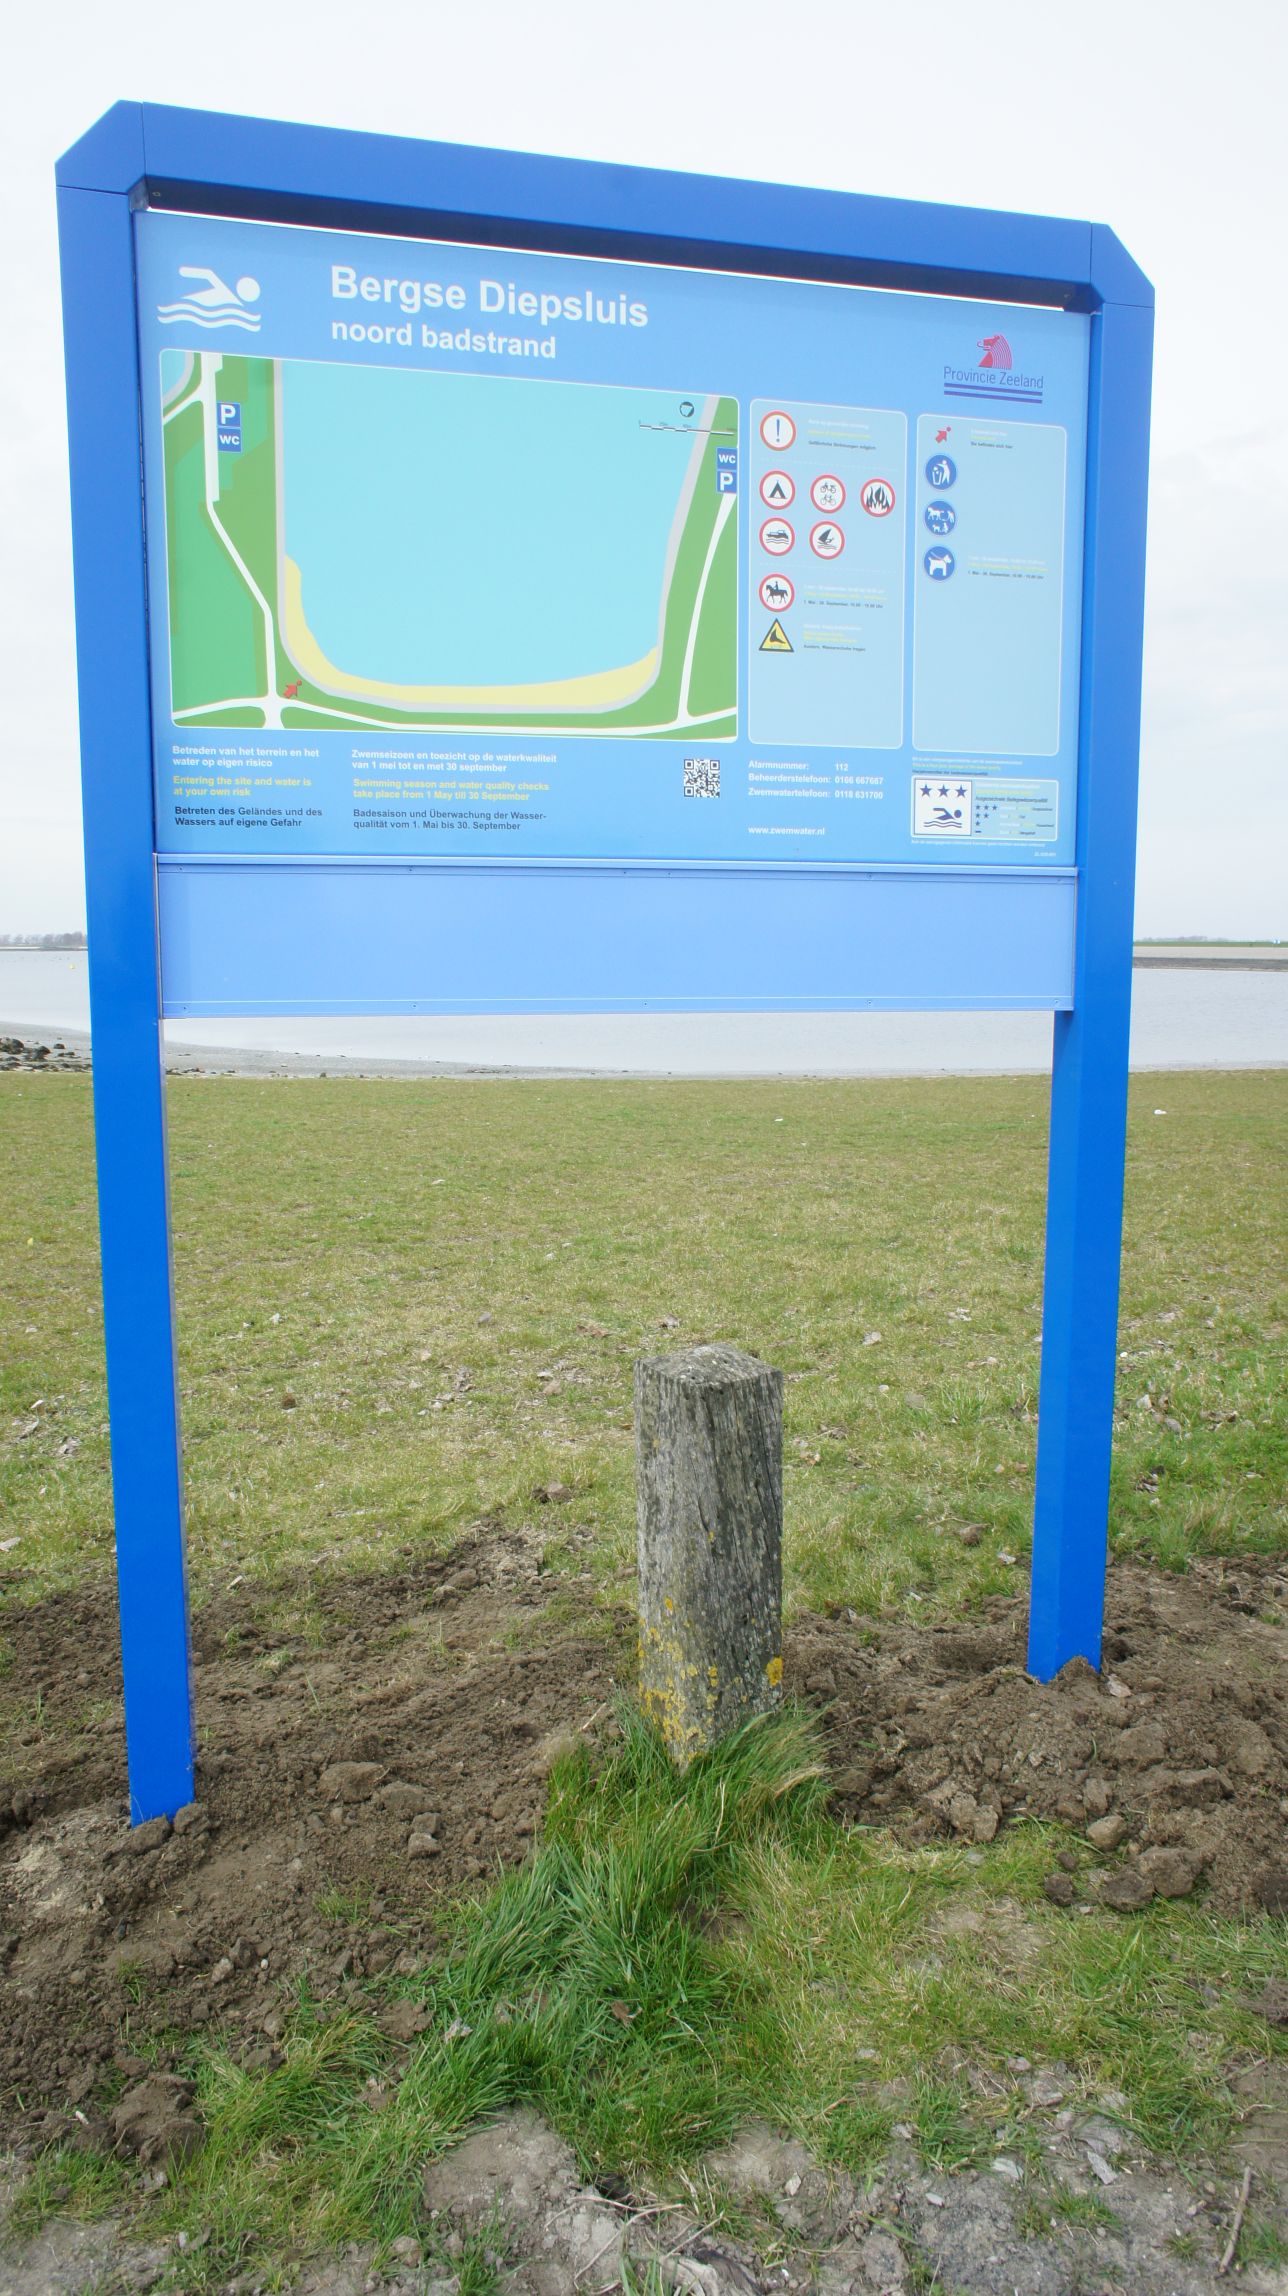 The information board at the swimming location Bergse Diepsluis Noord Badstrand